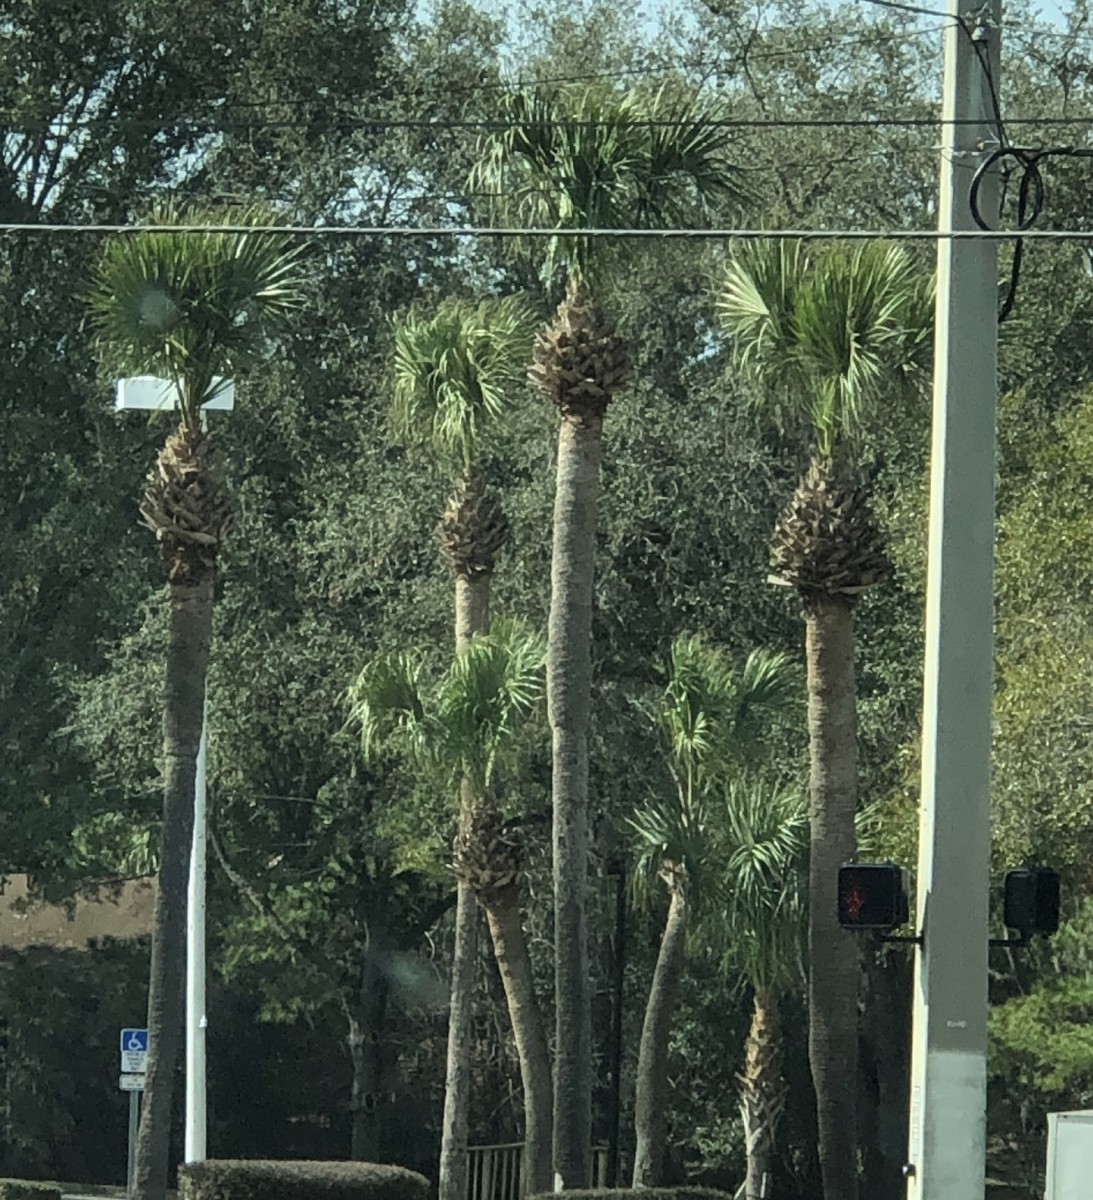 These Cabbage Palms have suffered not only a hurricane cut but also a pineapple cut. The pineapple cut involves removing all but the top boots, and trimming them so that the palm resembles an extremely tall pineapple plant.